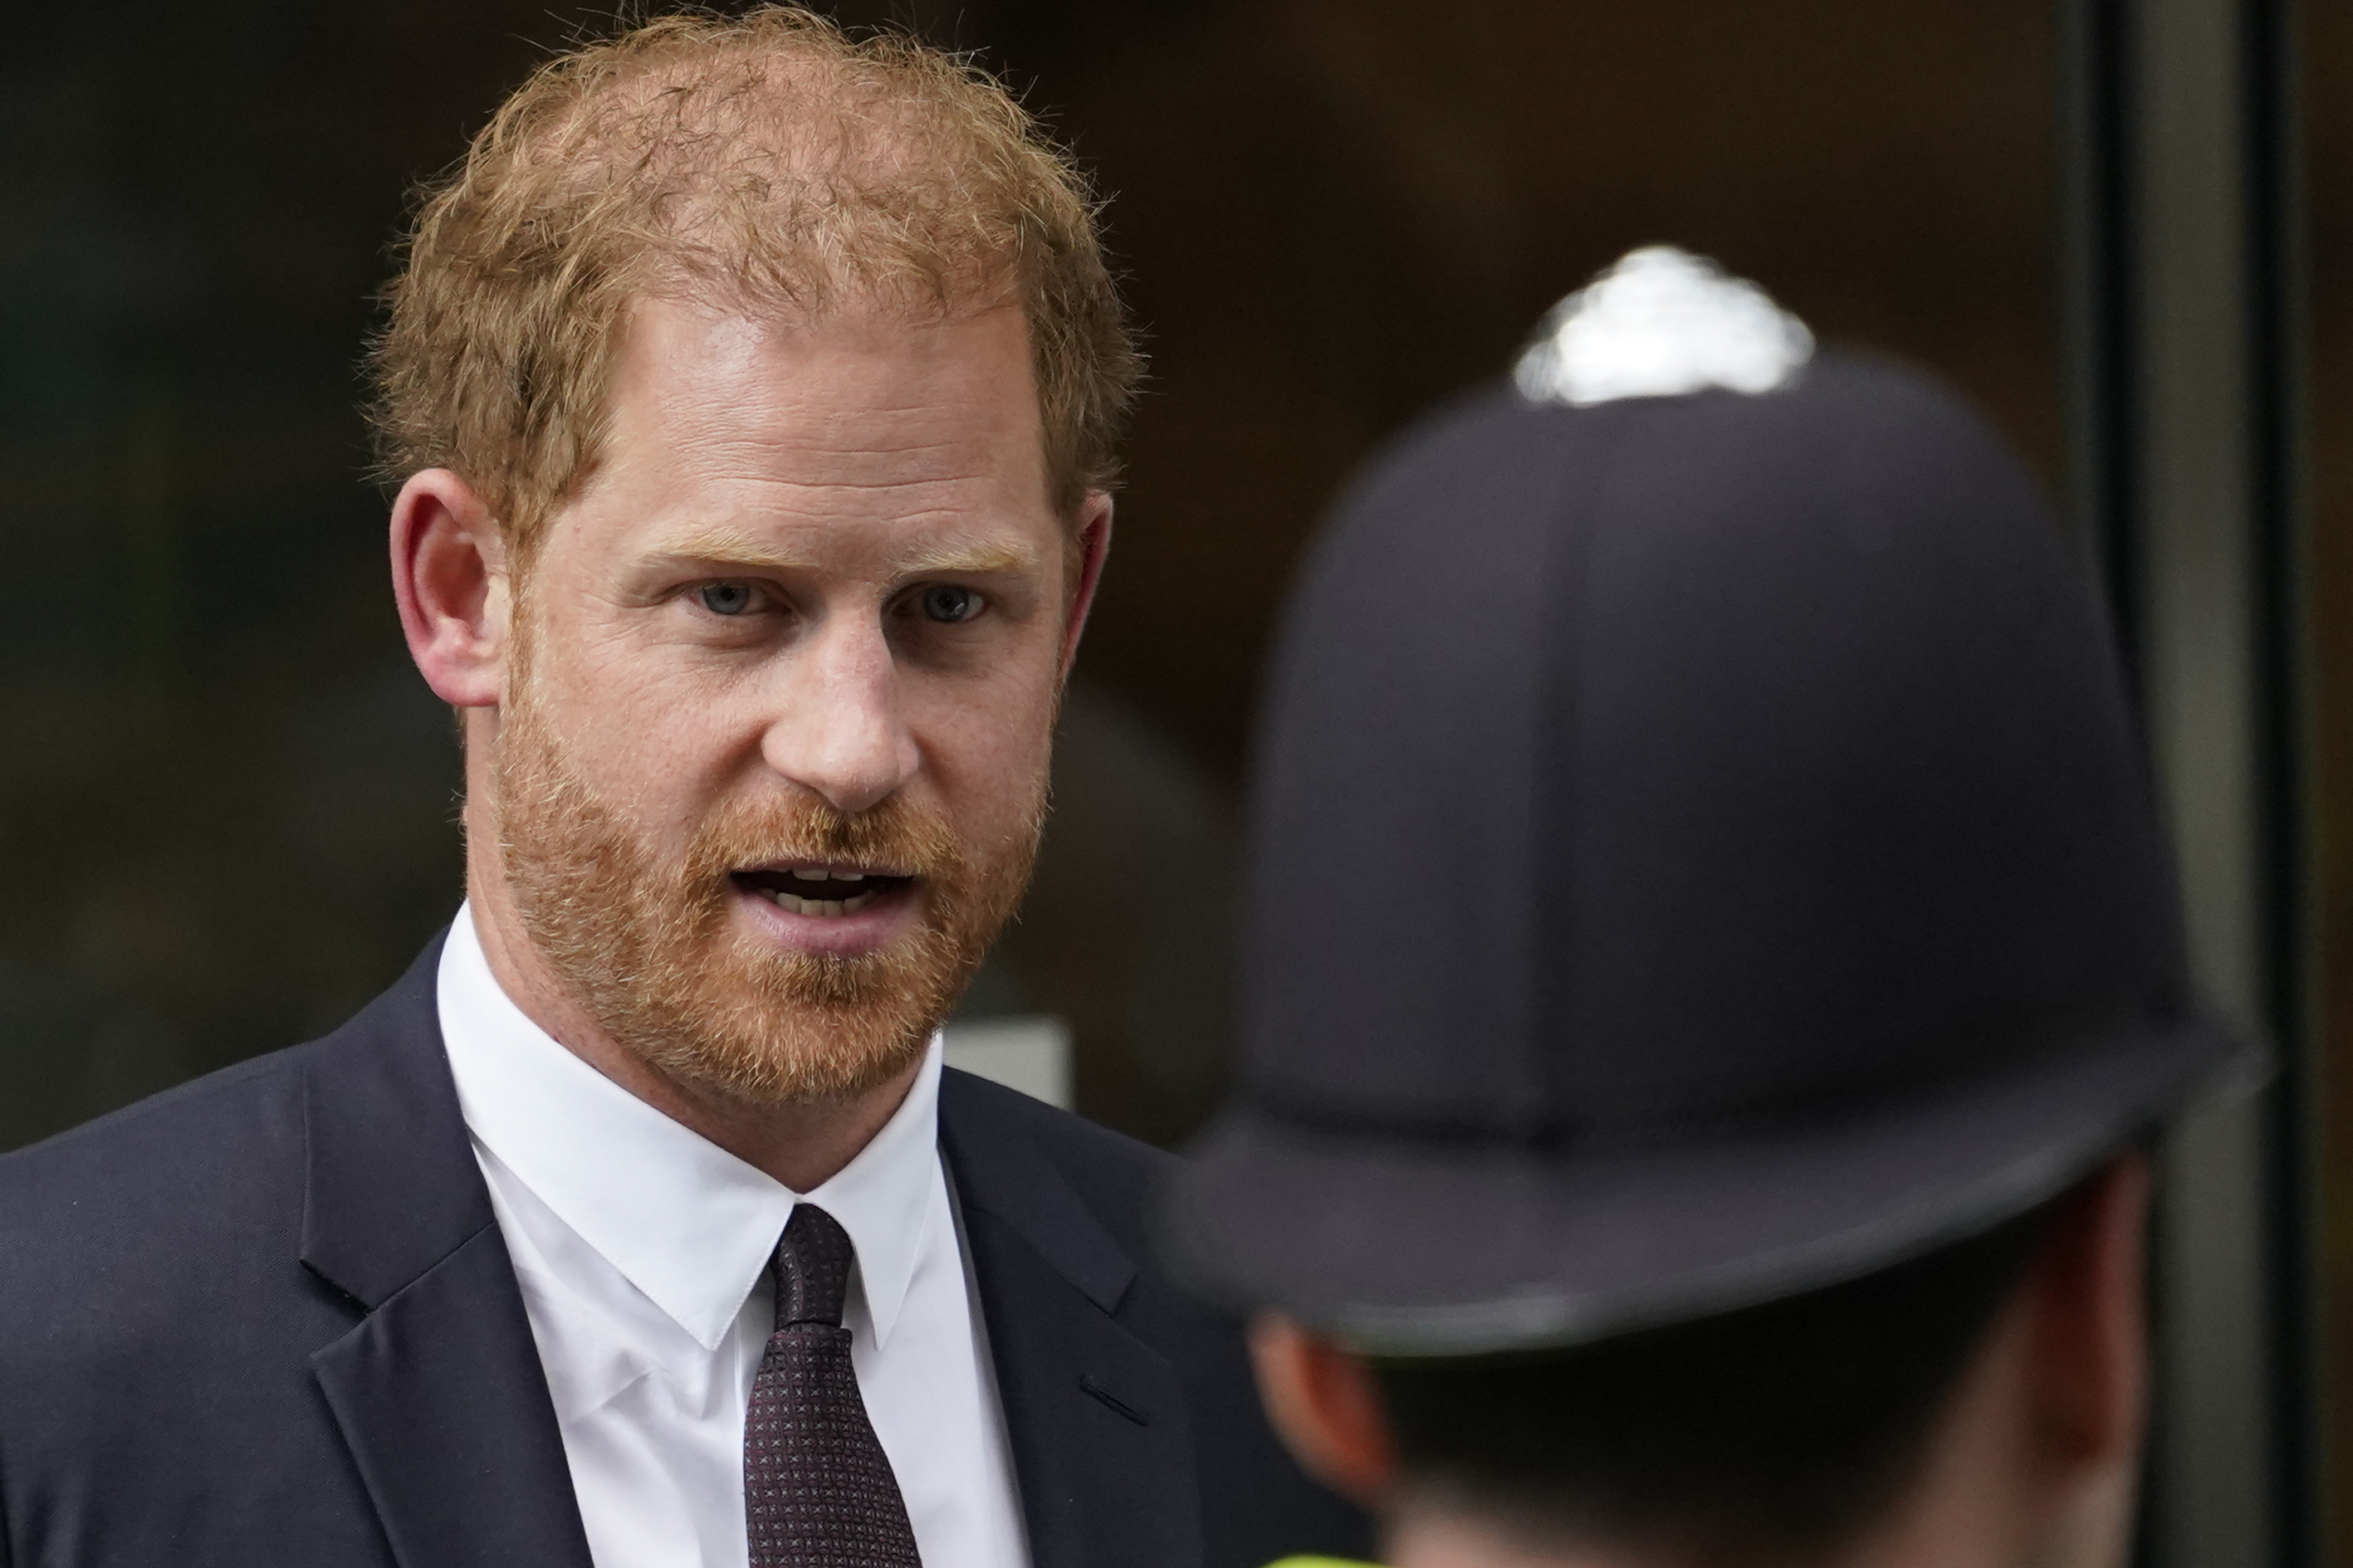 Prince Harry Calls His Victory in a Tabloid Suit “Slaying Dragons”